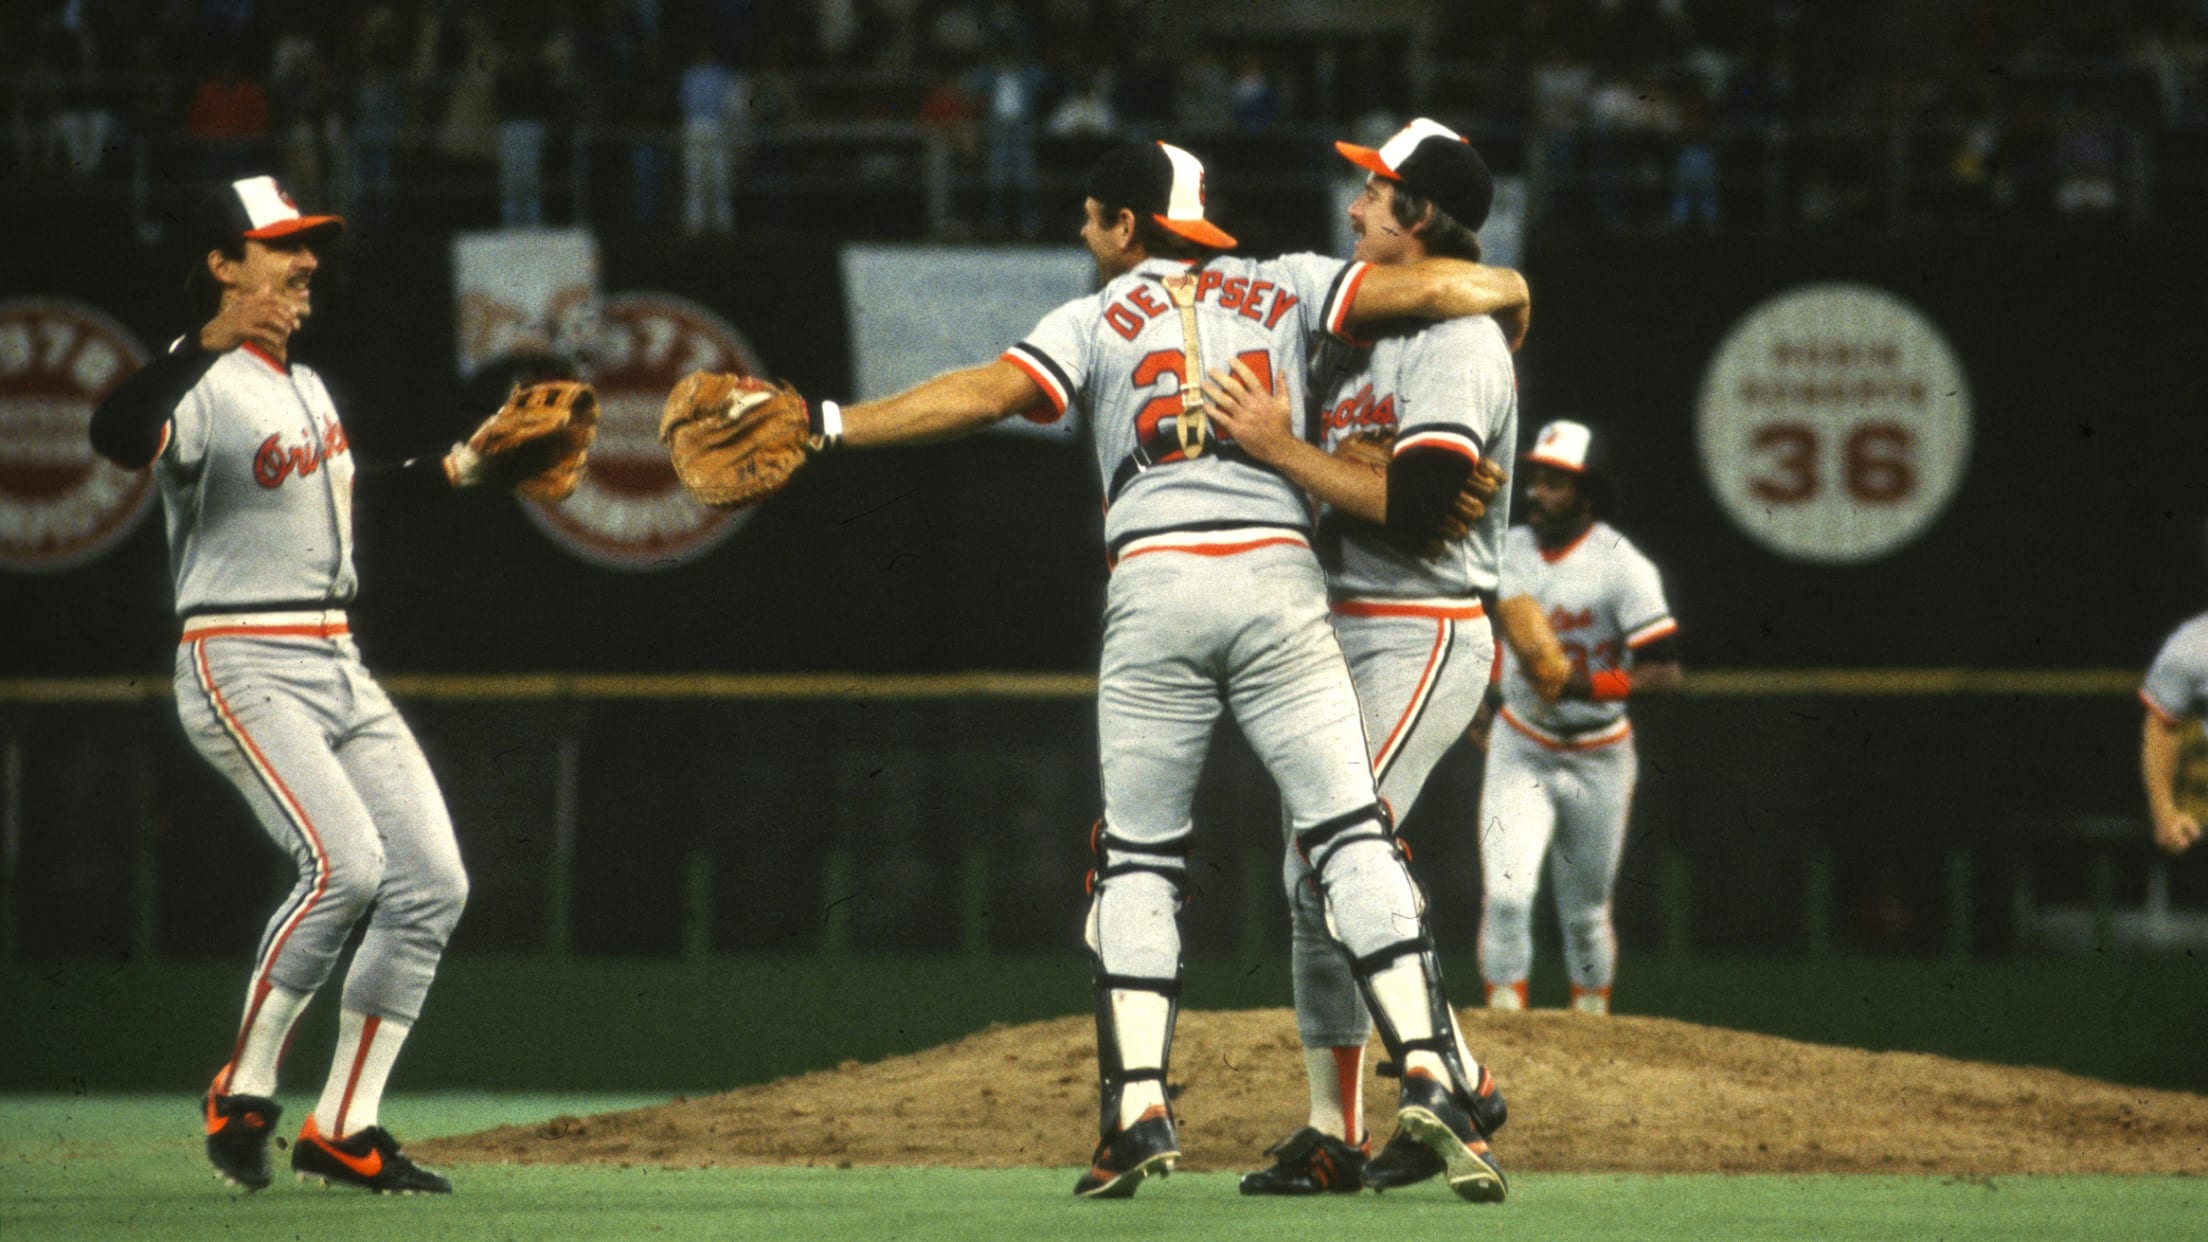 Bill Swaggerty Wouldn't Trade Orioles' 1983 Championship 'For The